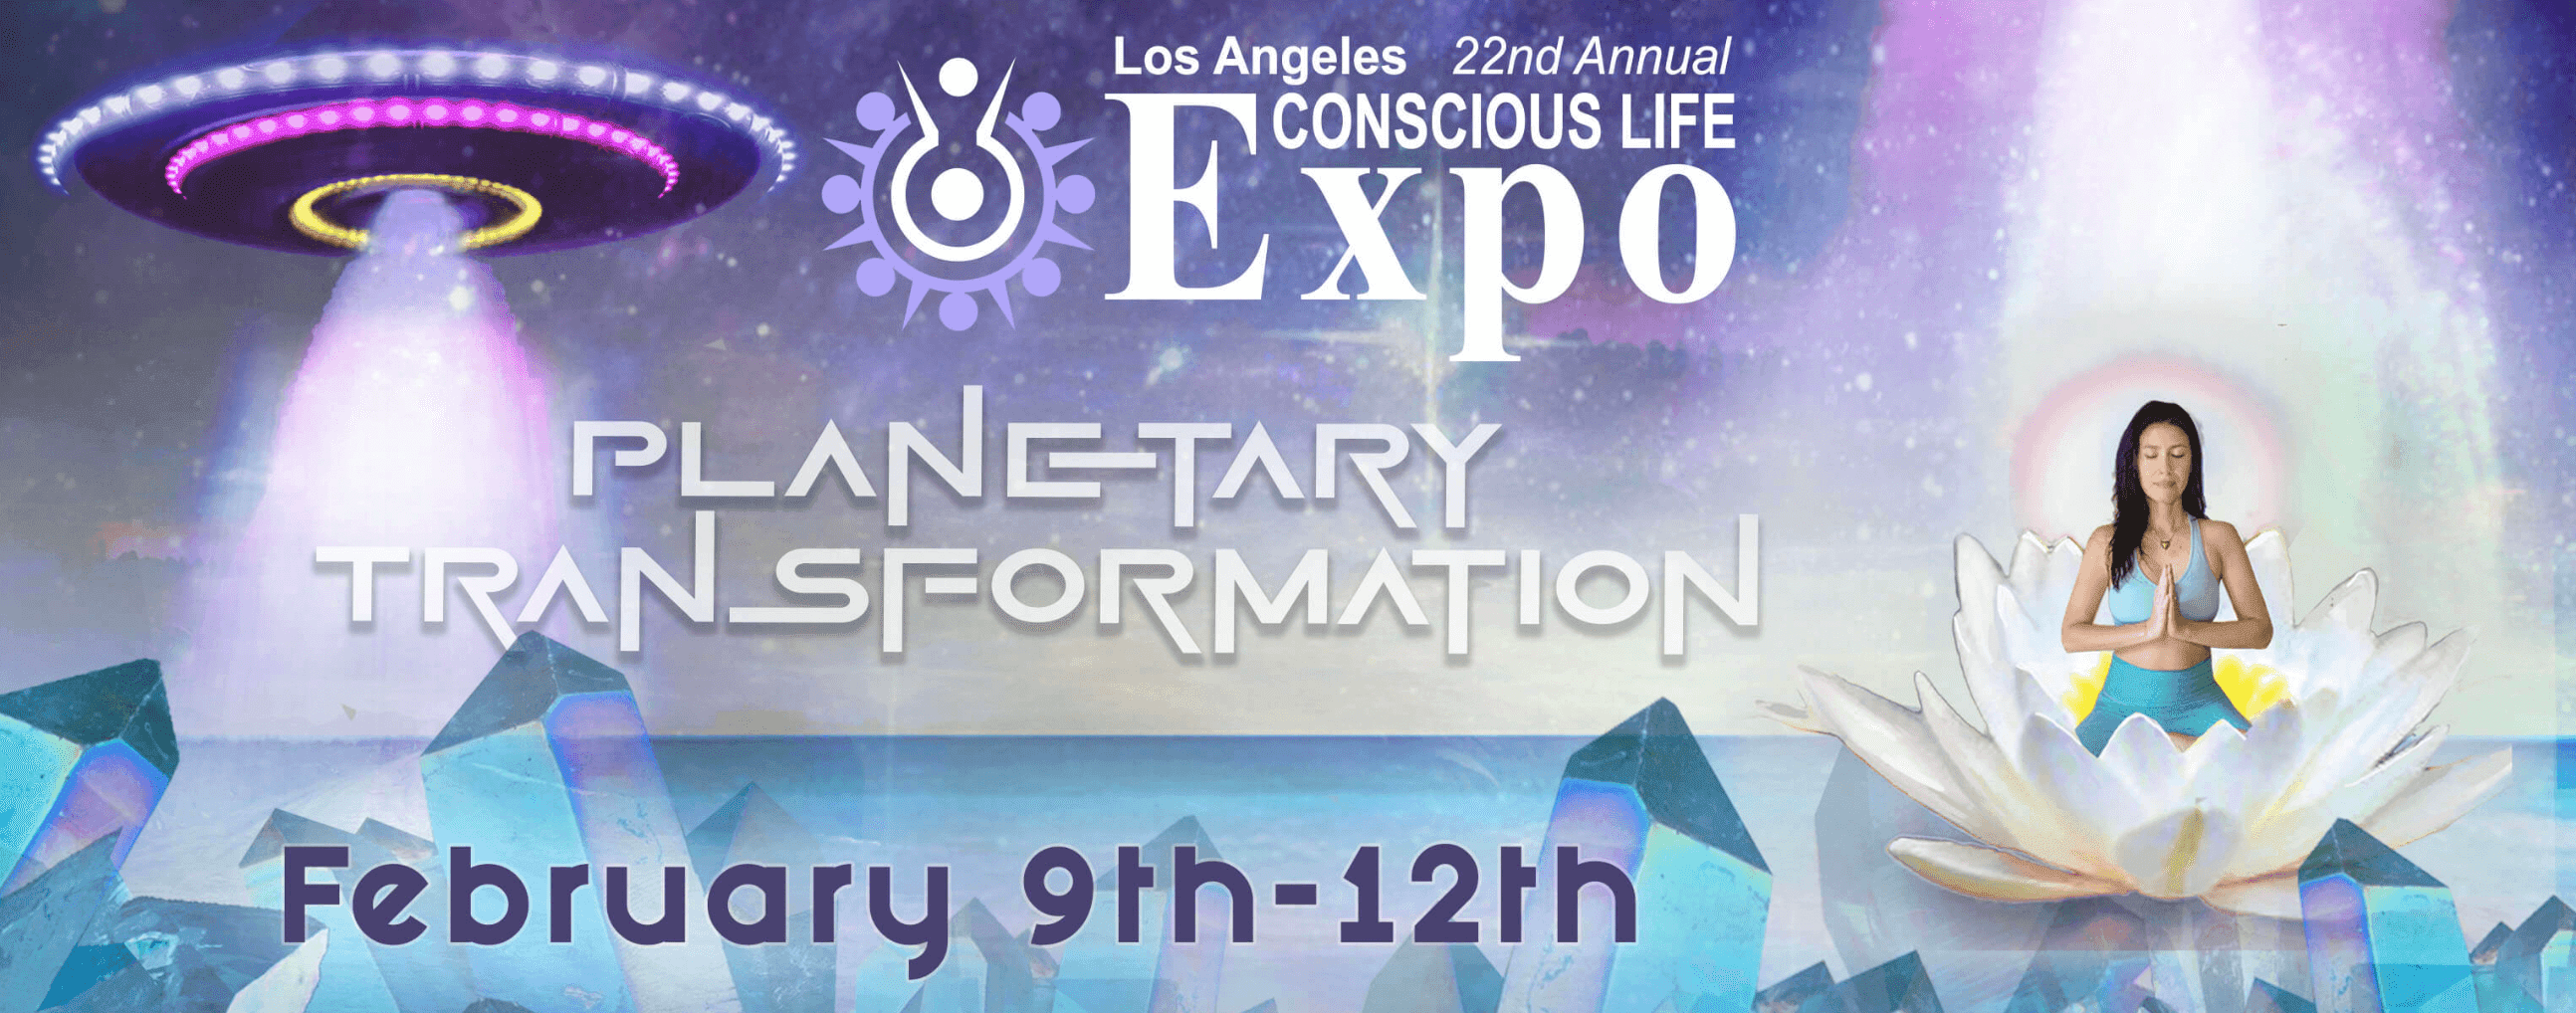 Los Angeles Conscious Life Expo image